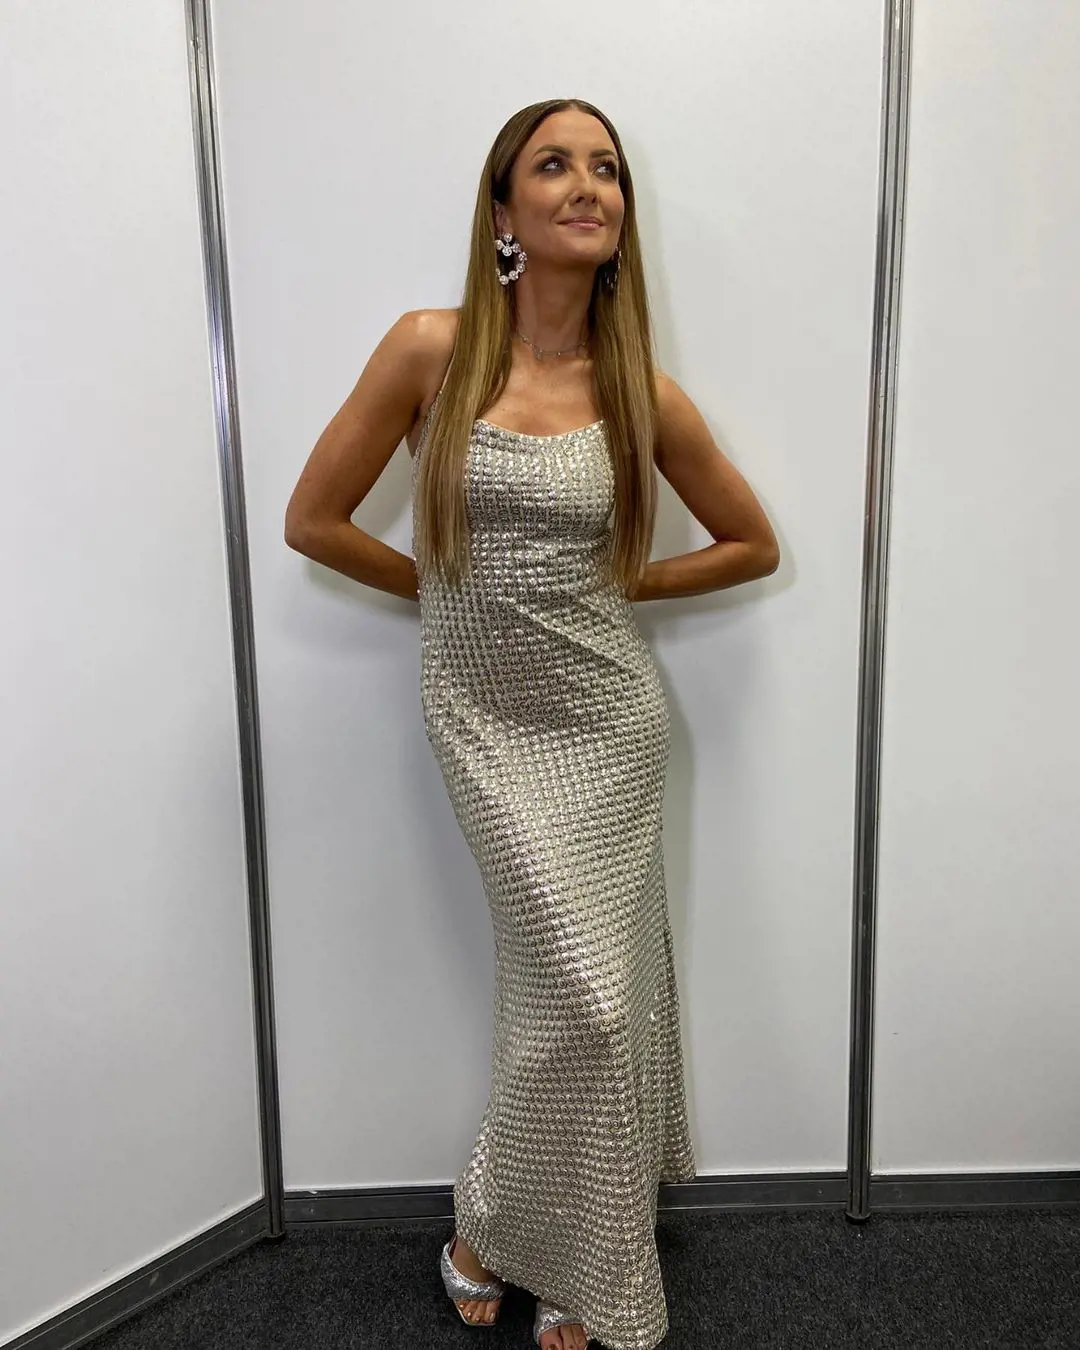 Jennifer styled by Fiona in silver sequin dress from Rhode